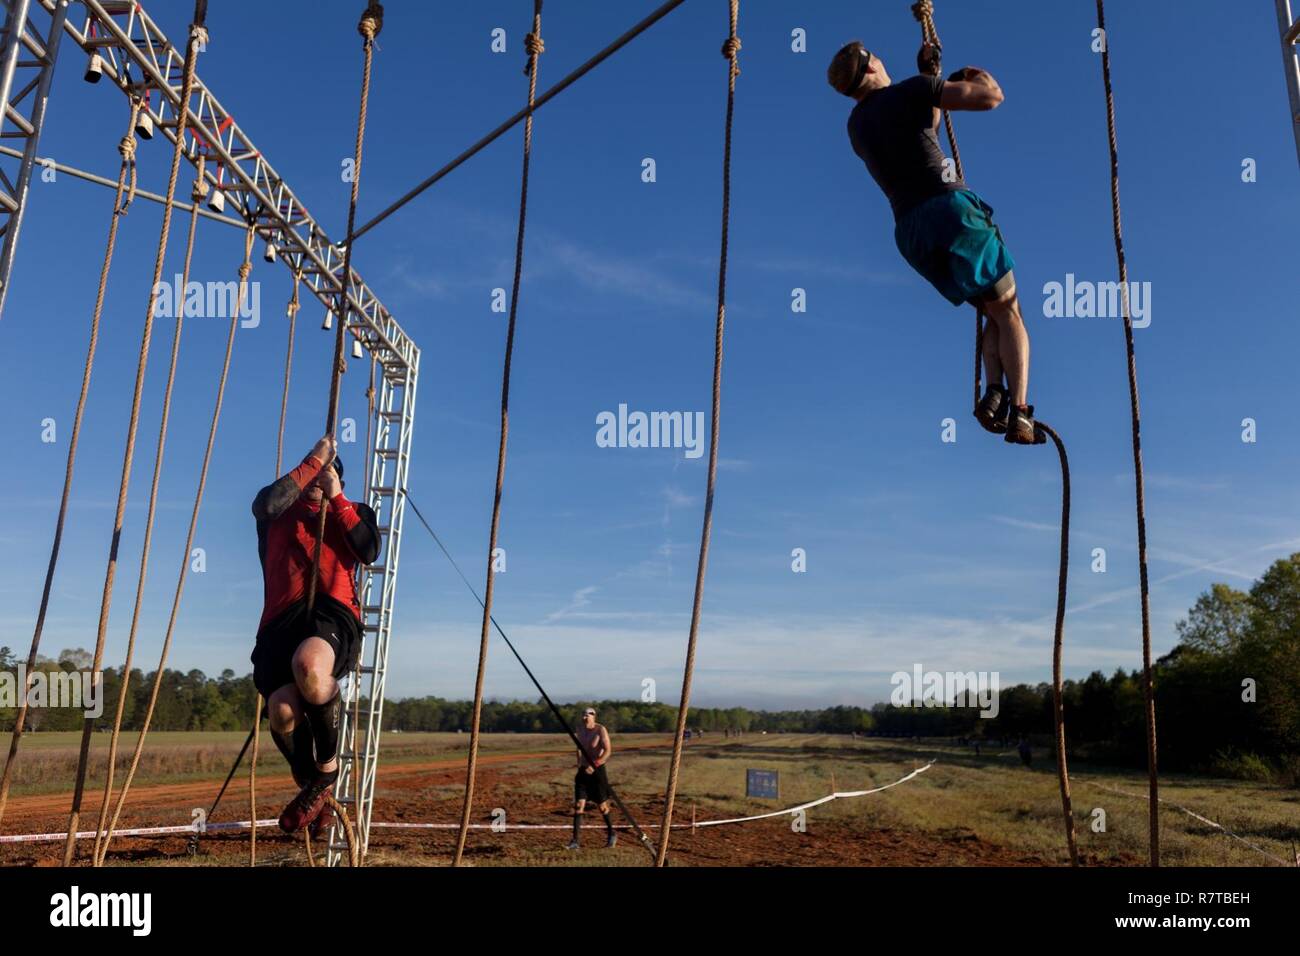 Spartan Race competitors perform a rope climb during a Spartan